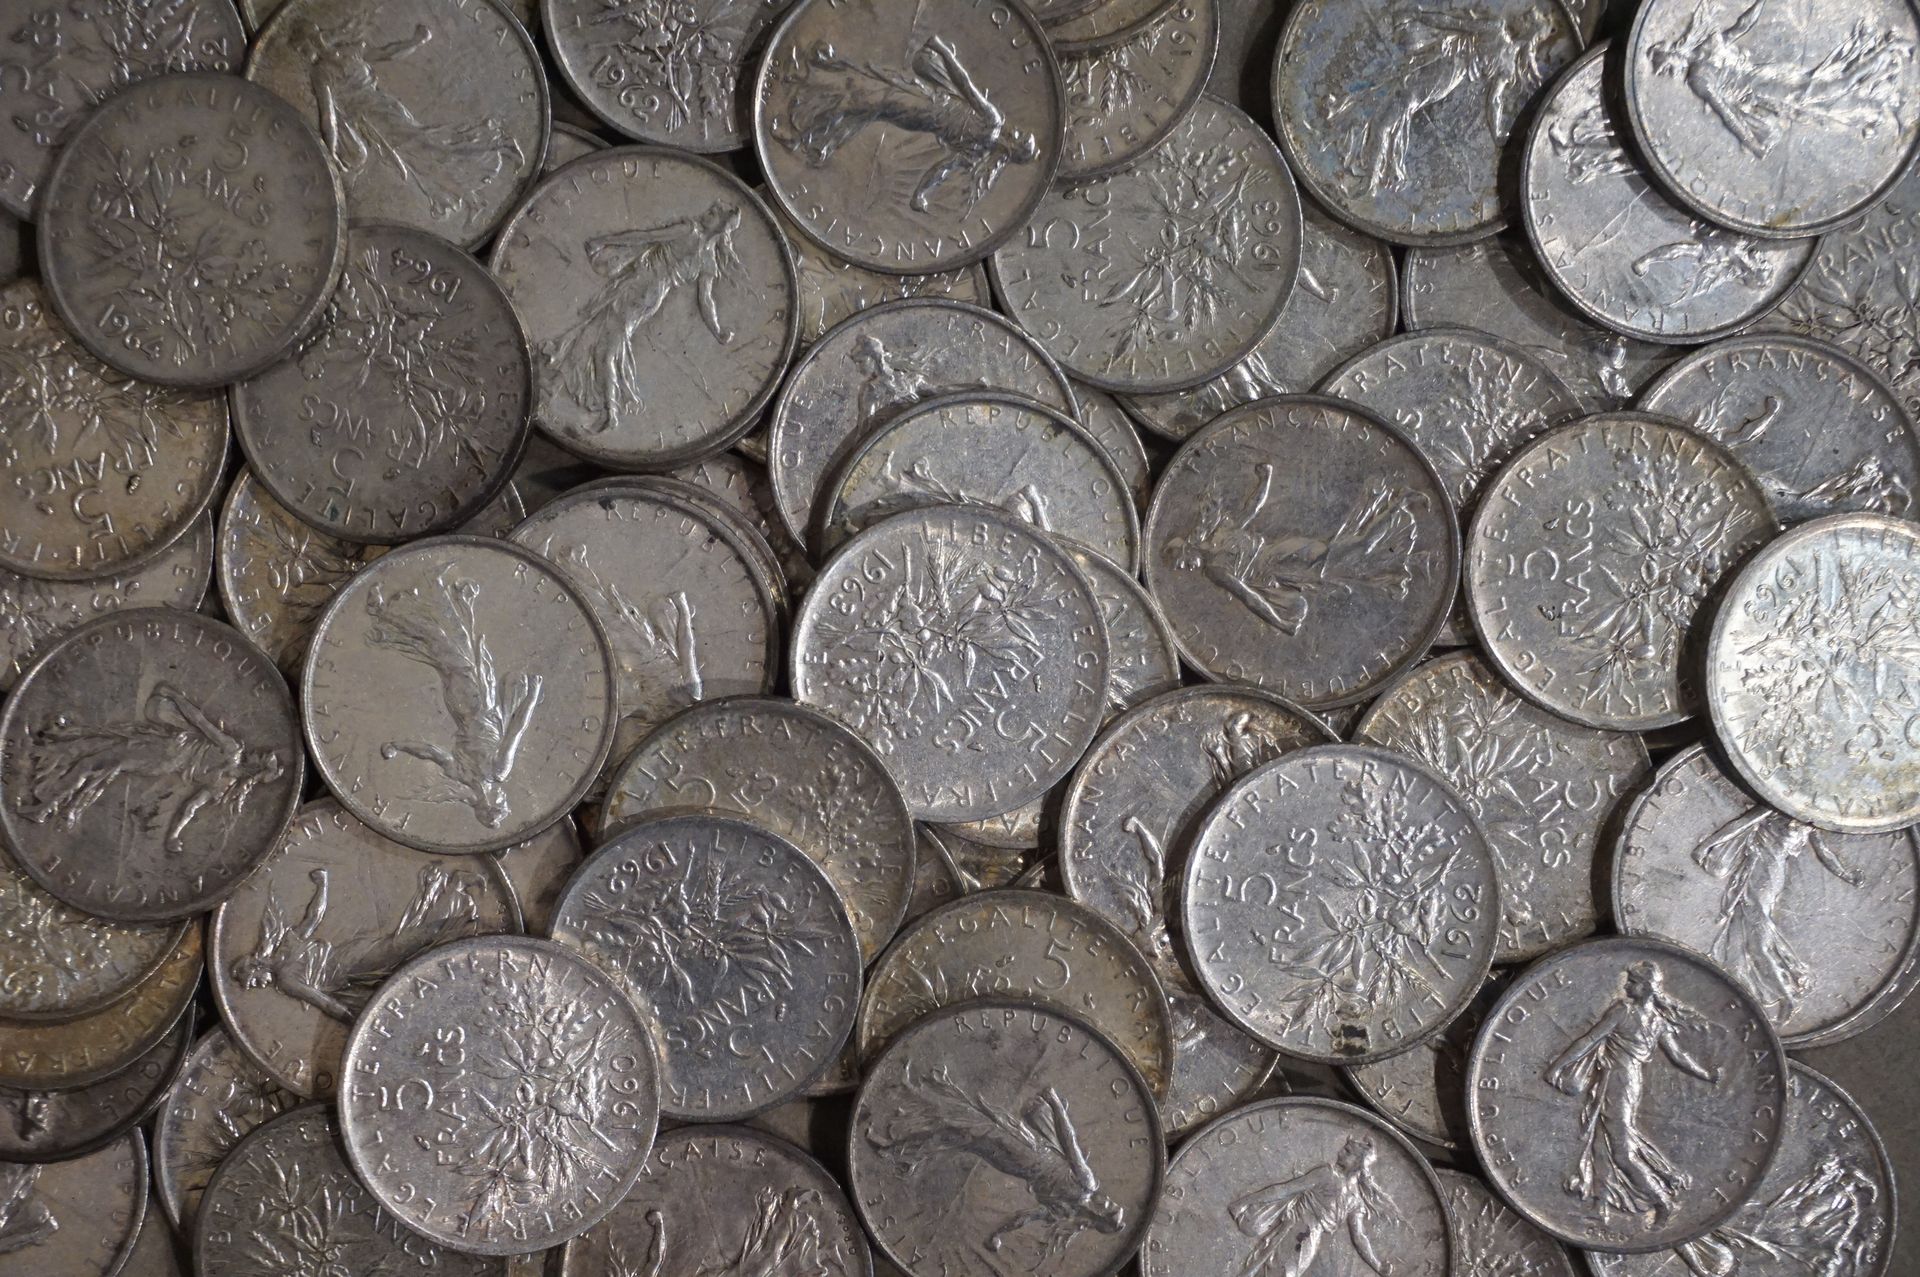 Null 75 pieces of 5 francs in silver (900 grs)